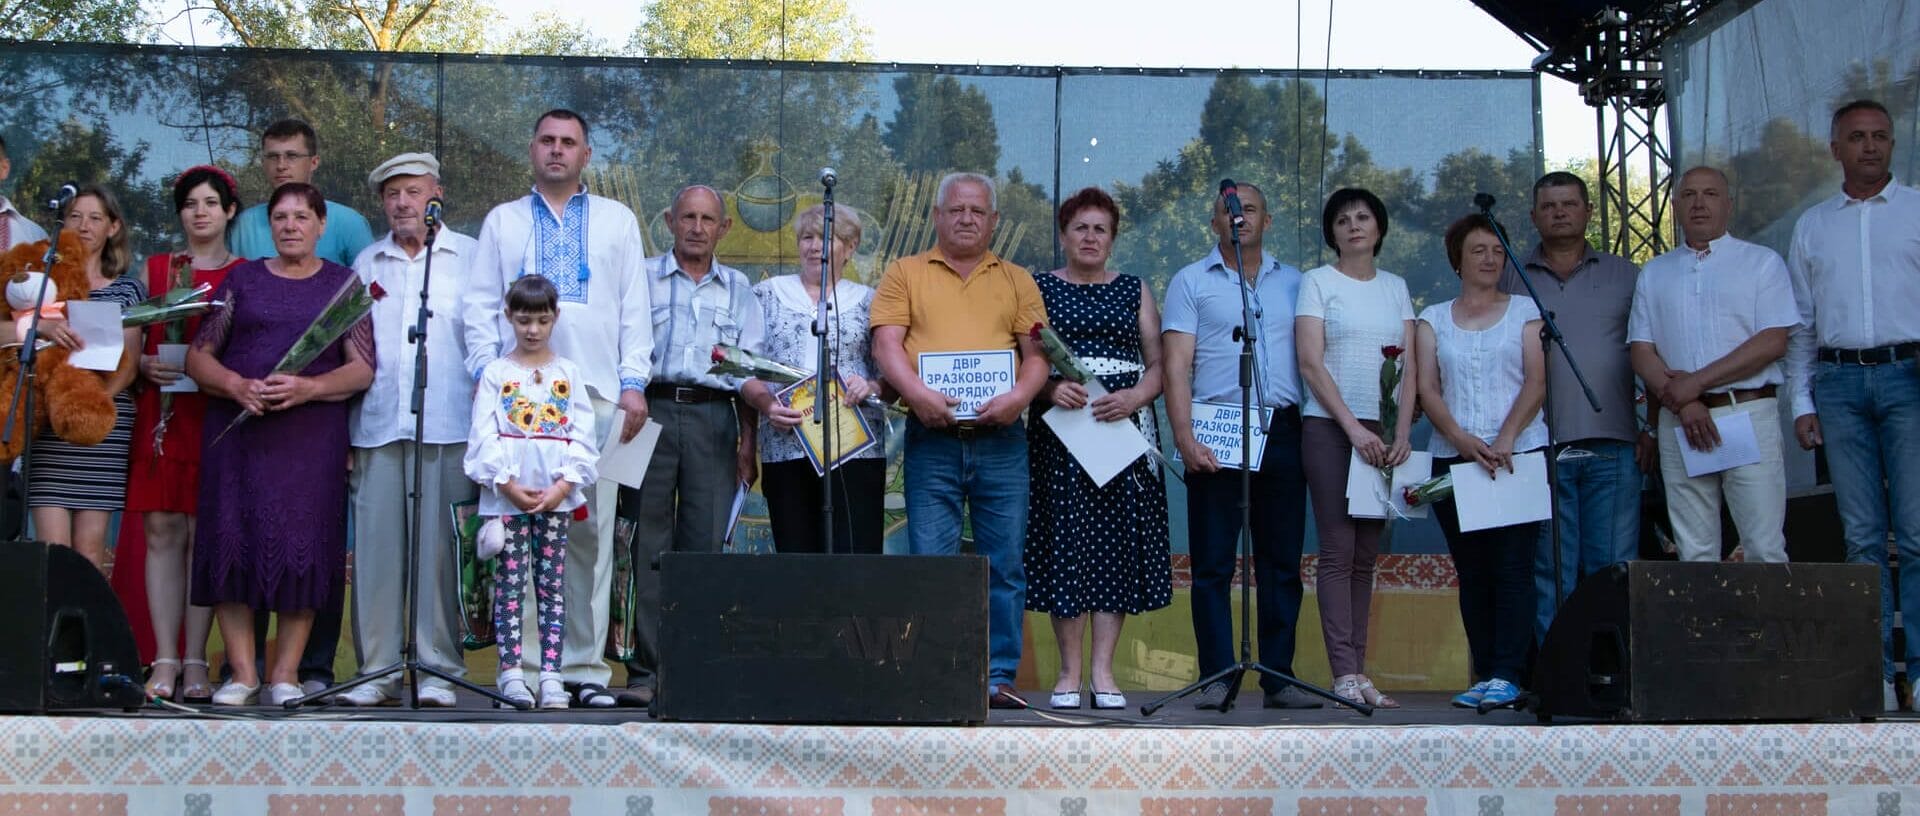 Awarding the residents of the Community on the Day of the Settlement / Photo by Maryna Karpets